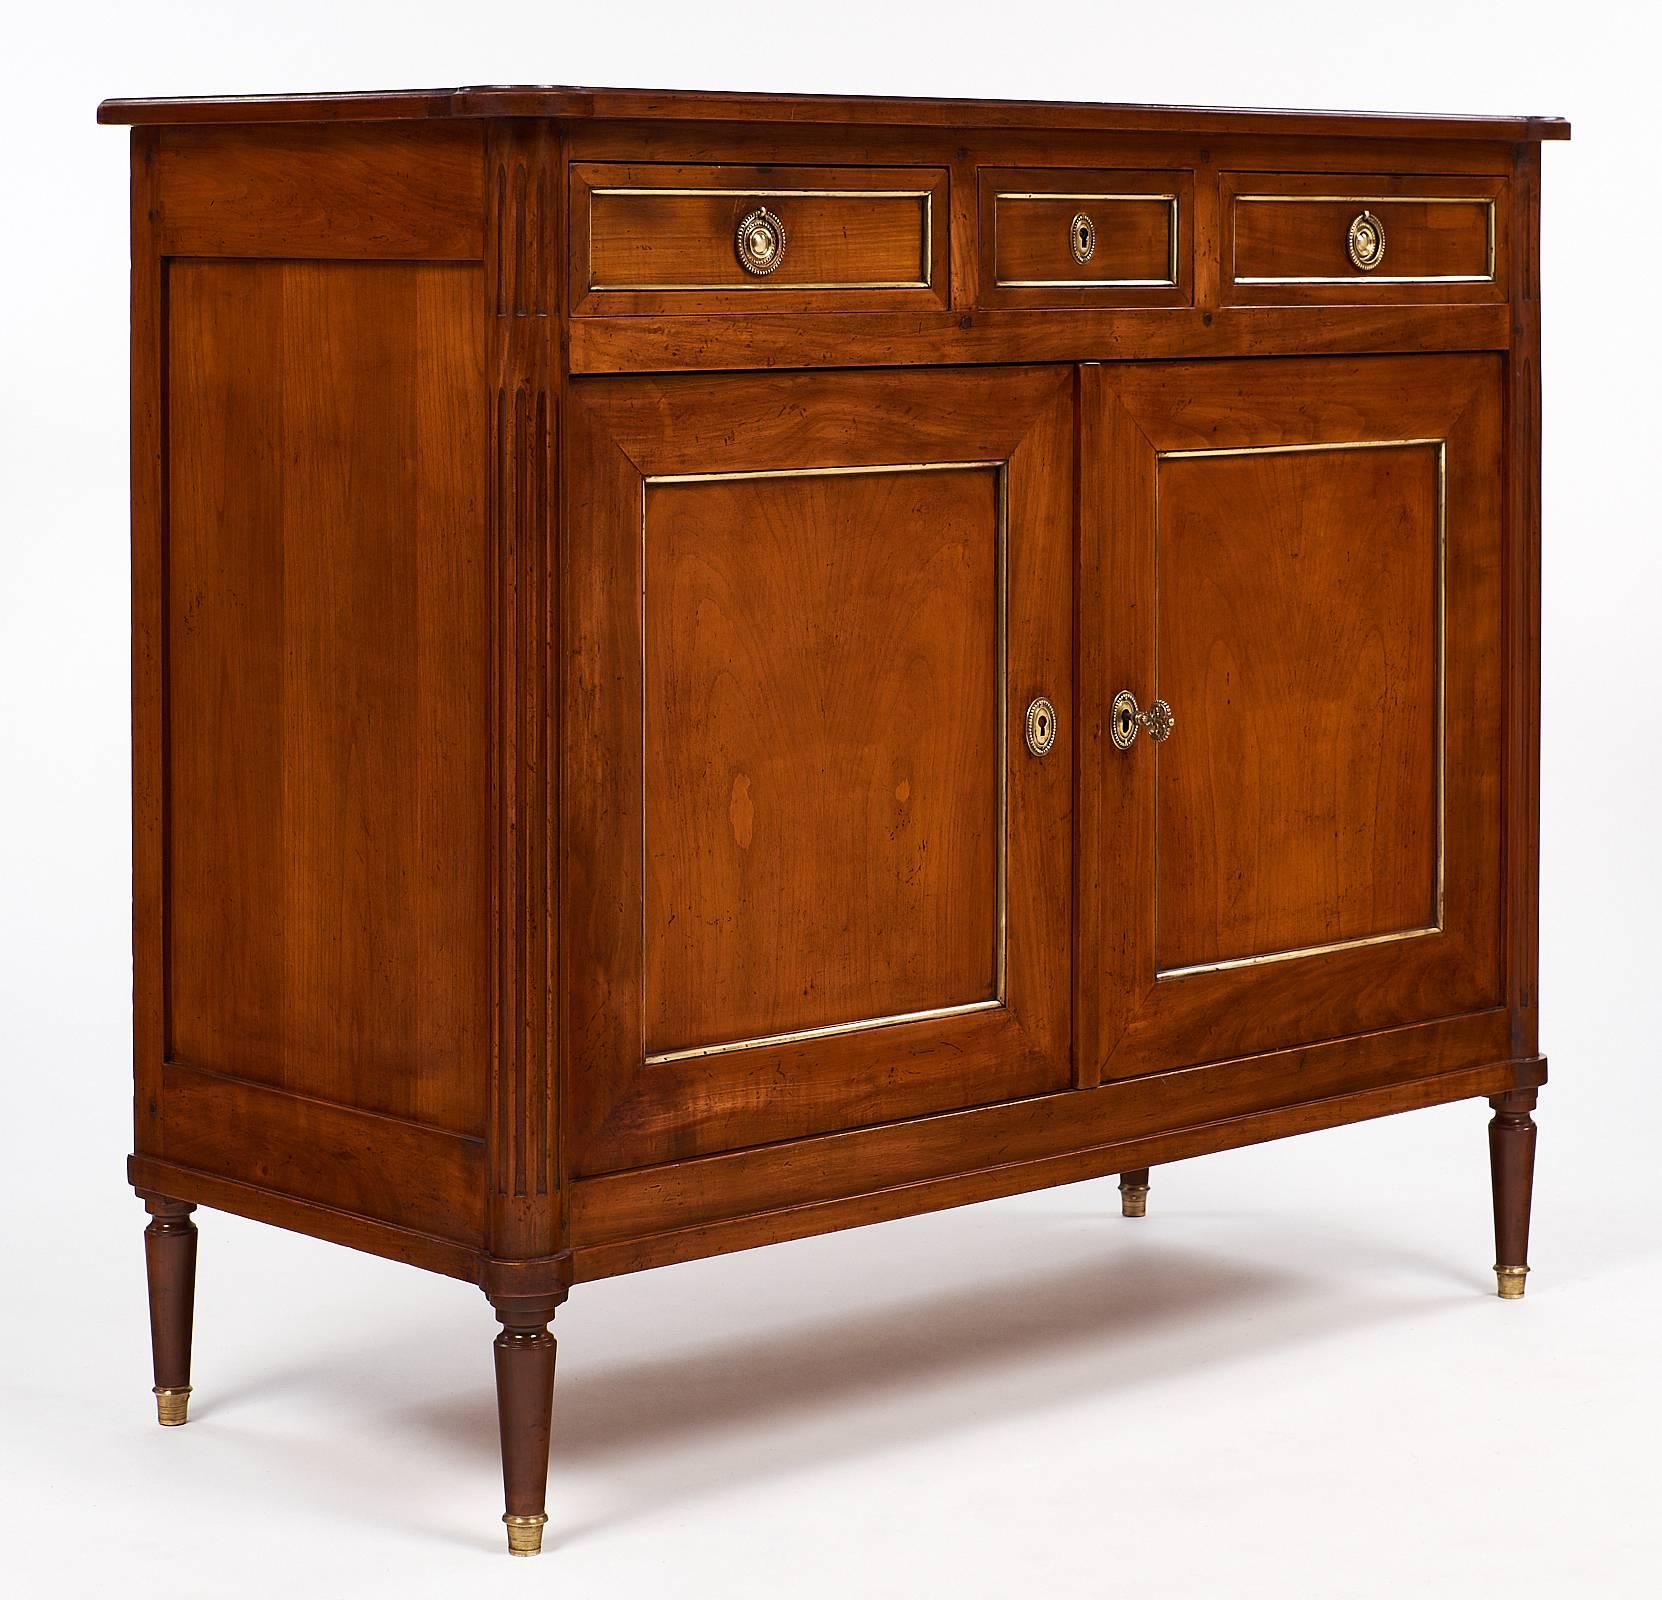 Beautiful antique buffet made of solid cherrywood and featuring finely cast bronze hardware and feet, gilt brass trim, two doors, and three drawers. This piece has a beautiful honey toned patina to the fruitwood! We love the high quality Provincial